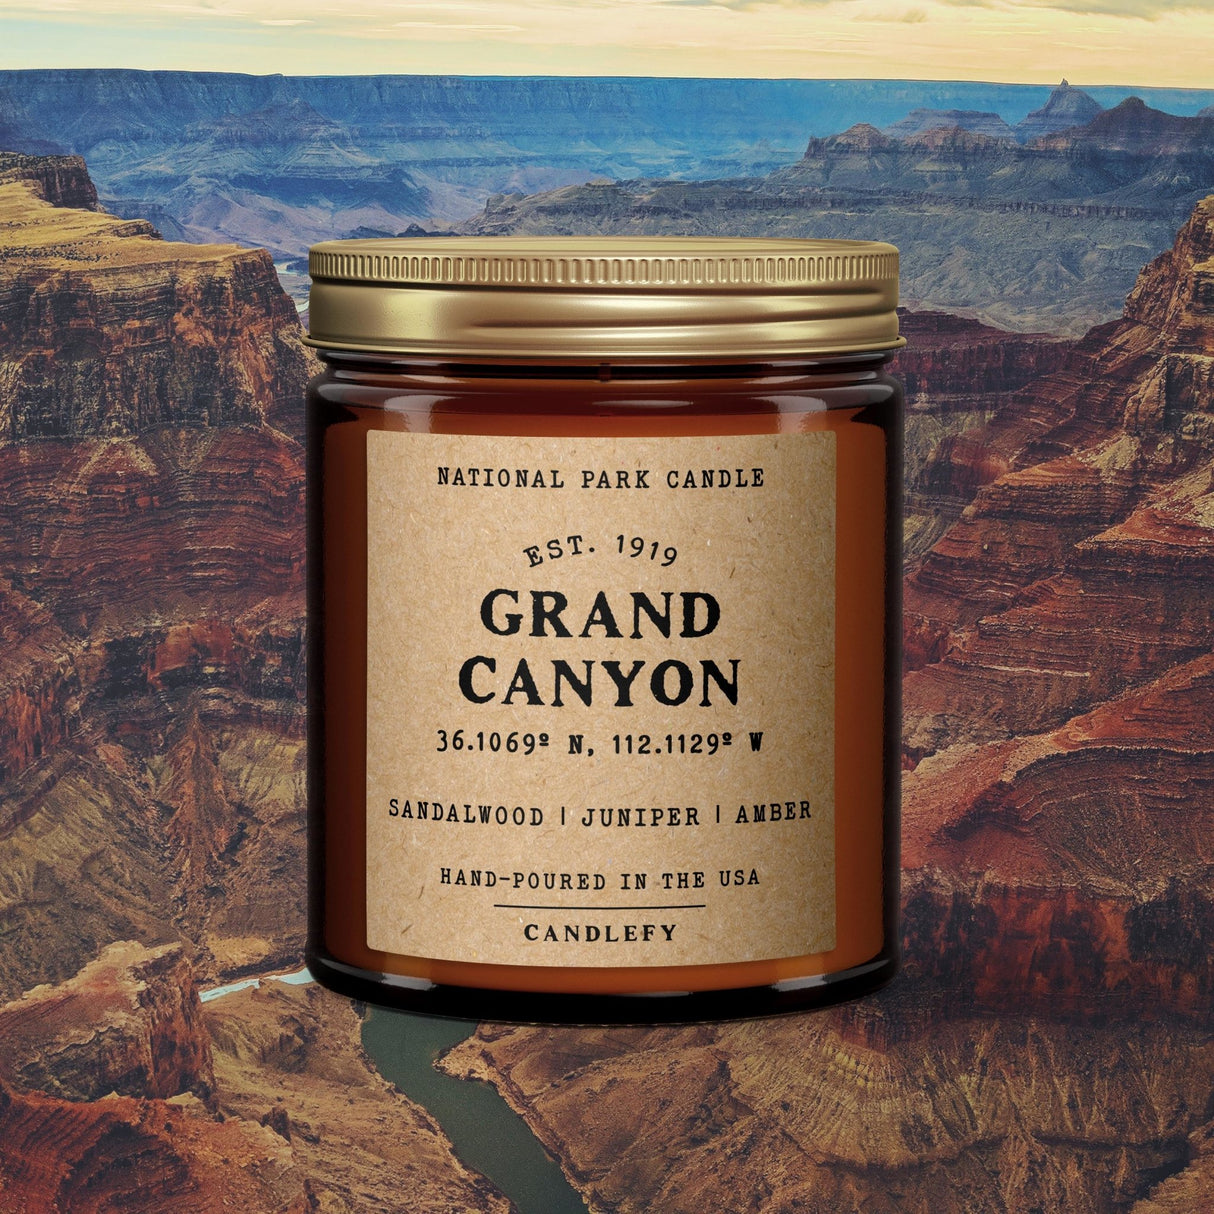 Grand Canyon National Park Candle - Candlefy